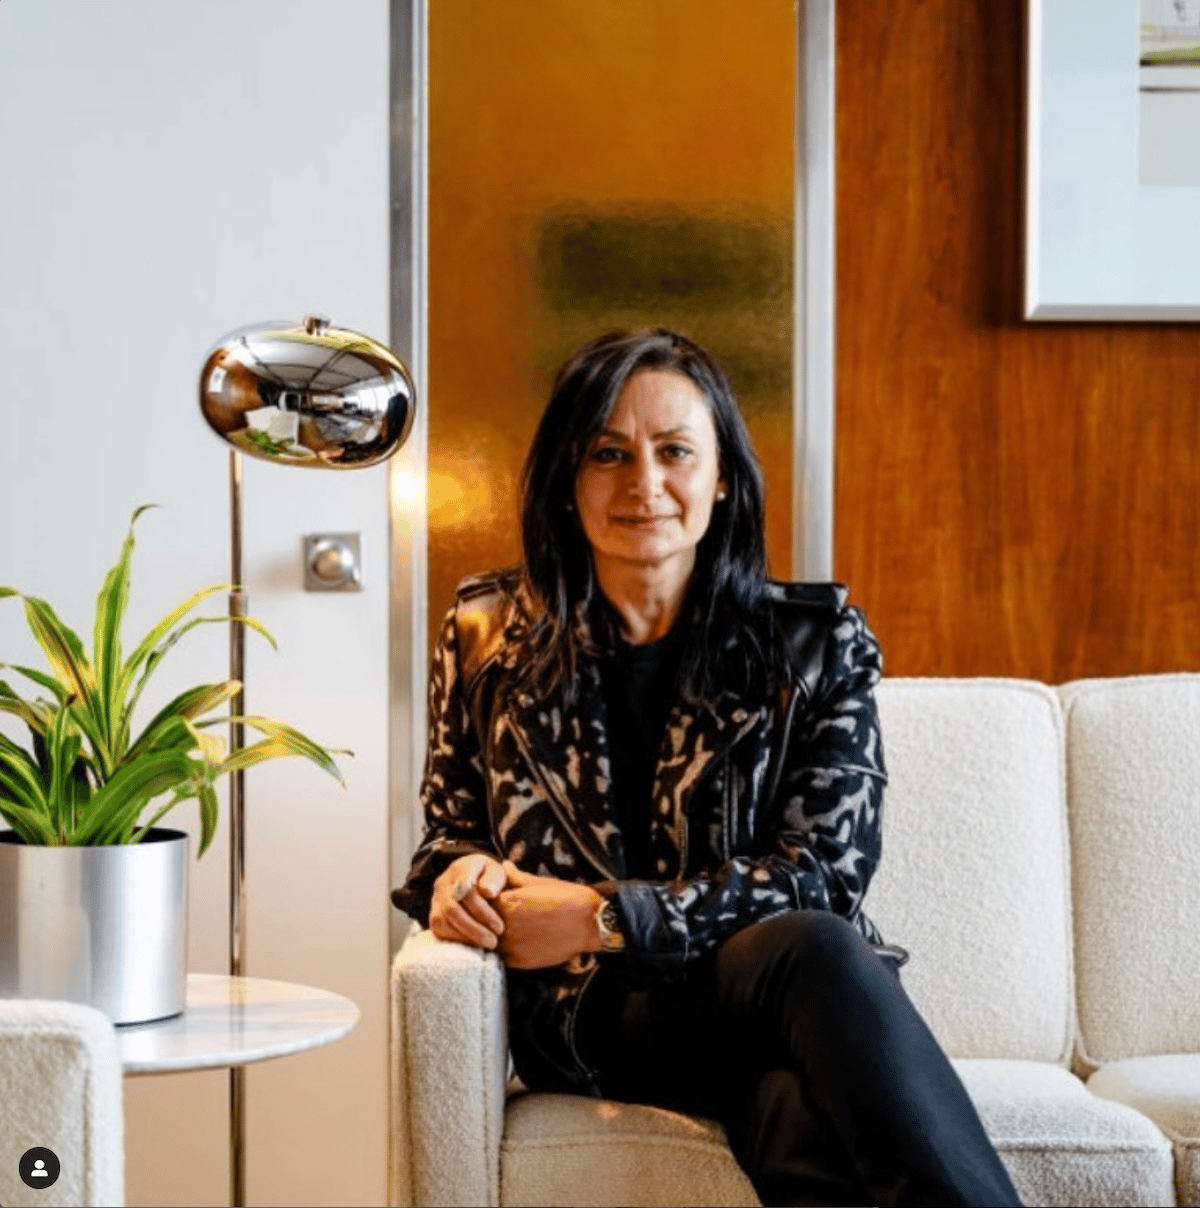 What Drives Her Sharon Gauci, Design, Buick - A Girls Guide to Cars